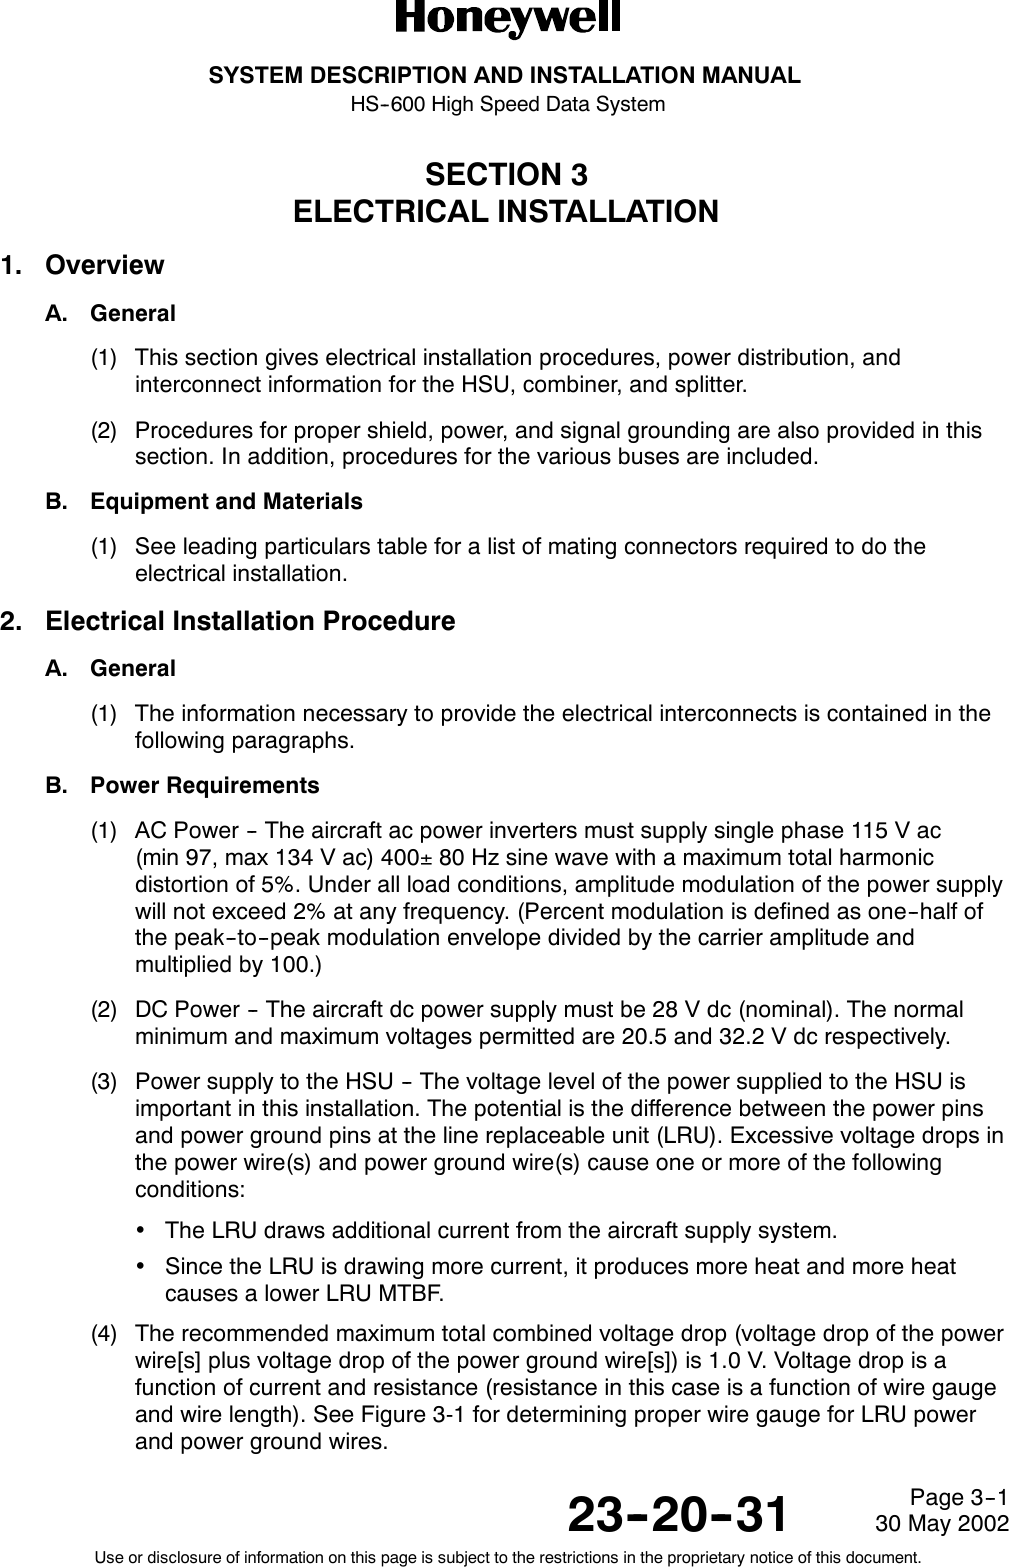 SYSTEM DESCRIPTION AND INSTALLATION MANUALHS--600 High Speed Data System23--20--3130 May 2002Use or disclosure of information on this page is subject to the restrictions in the proprietary notice of this document.Page 3--1SECTION 3ELECTRICAL INSTALLATION1. OverviewA. General(1) This section gives electrical installation procedures, power distribution, andinterconnect information for the HSU, combiner, and splitter.(2) Procedures for proper shield, power, and signal grounding are also provided in thissection. In addition, procedures for the various buses are included.B. Equipment and Materials(1) See leading particulars table for a list of mating connectors required to do theelectrical installation.2. Electrical Installation ProcedureA. General(1) The information necessary to provide the electrical interconnects is contained in thefollowing paragraphs.B. Power Requirements(1) AC Power -- The aircraft ac power inverters must supply single phase 115 V ac(min 97, max 134 V ac) 400±80 Hz sine wave with a maximum total harmonicdistortion of 5%. Under all load conditions, amplitude modulation of the power supplywill not exceed 2% at any frequency. (Percent modulation is defined as one--half ofthe peak--to--peak modulation envelope divided by the carrier amplitude andmultiplied by 100.)(2) DC Power -- The aircraft dc power supply must be 28 V dc (nominal). The normalminimum and maximum voltages permitted are 20.5 and 32.2 V dc respectively.(3) Power supply to the HSU -- The voltage level of the power supplied to the HSU isimportant in this installation. The potential is the difference between the power pinsand power ground pins at the line replaceable unit (LRU). Excessive voltage drops inthe power wire(s) and power ground wire(s) cause one or more of the followingconditions:•The LRU draws additional current from the aircraft supply system.•Since the LRU is drawing more current, it produces more heat and more heatcauses a lower LRU MTBF.(4) The recommended maximum total combined voltage drop (voltage drop of the powerwire[s] plus voltage drop of the power ground wire[s]) is 1.0 V. Voltage drop is afunction of current and resistance (resistance in this case is a function of wire gaugeand wire length). See Figure 3-1 for determining proper wire gauge for LRU powerand power ground wires.